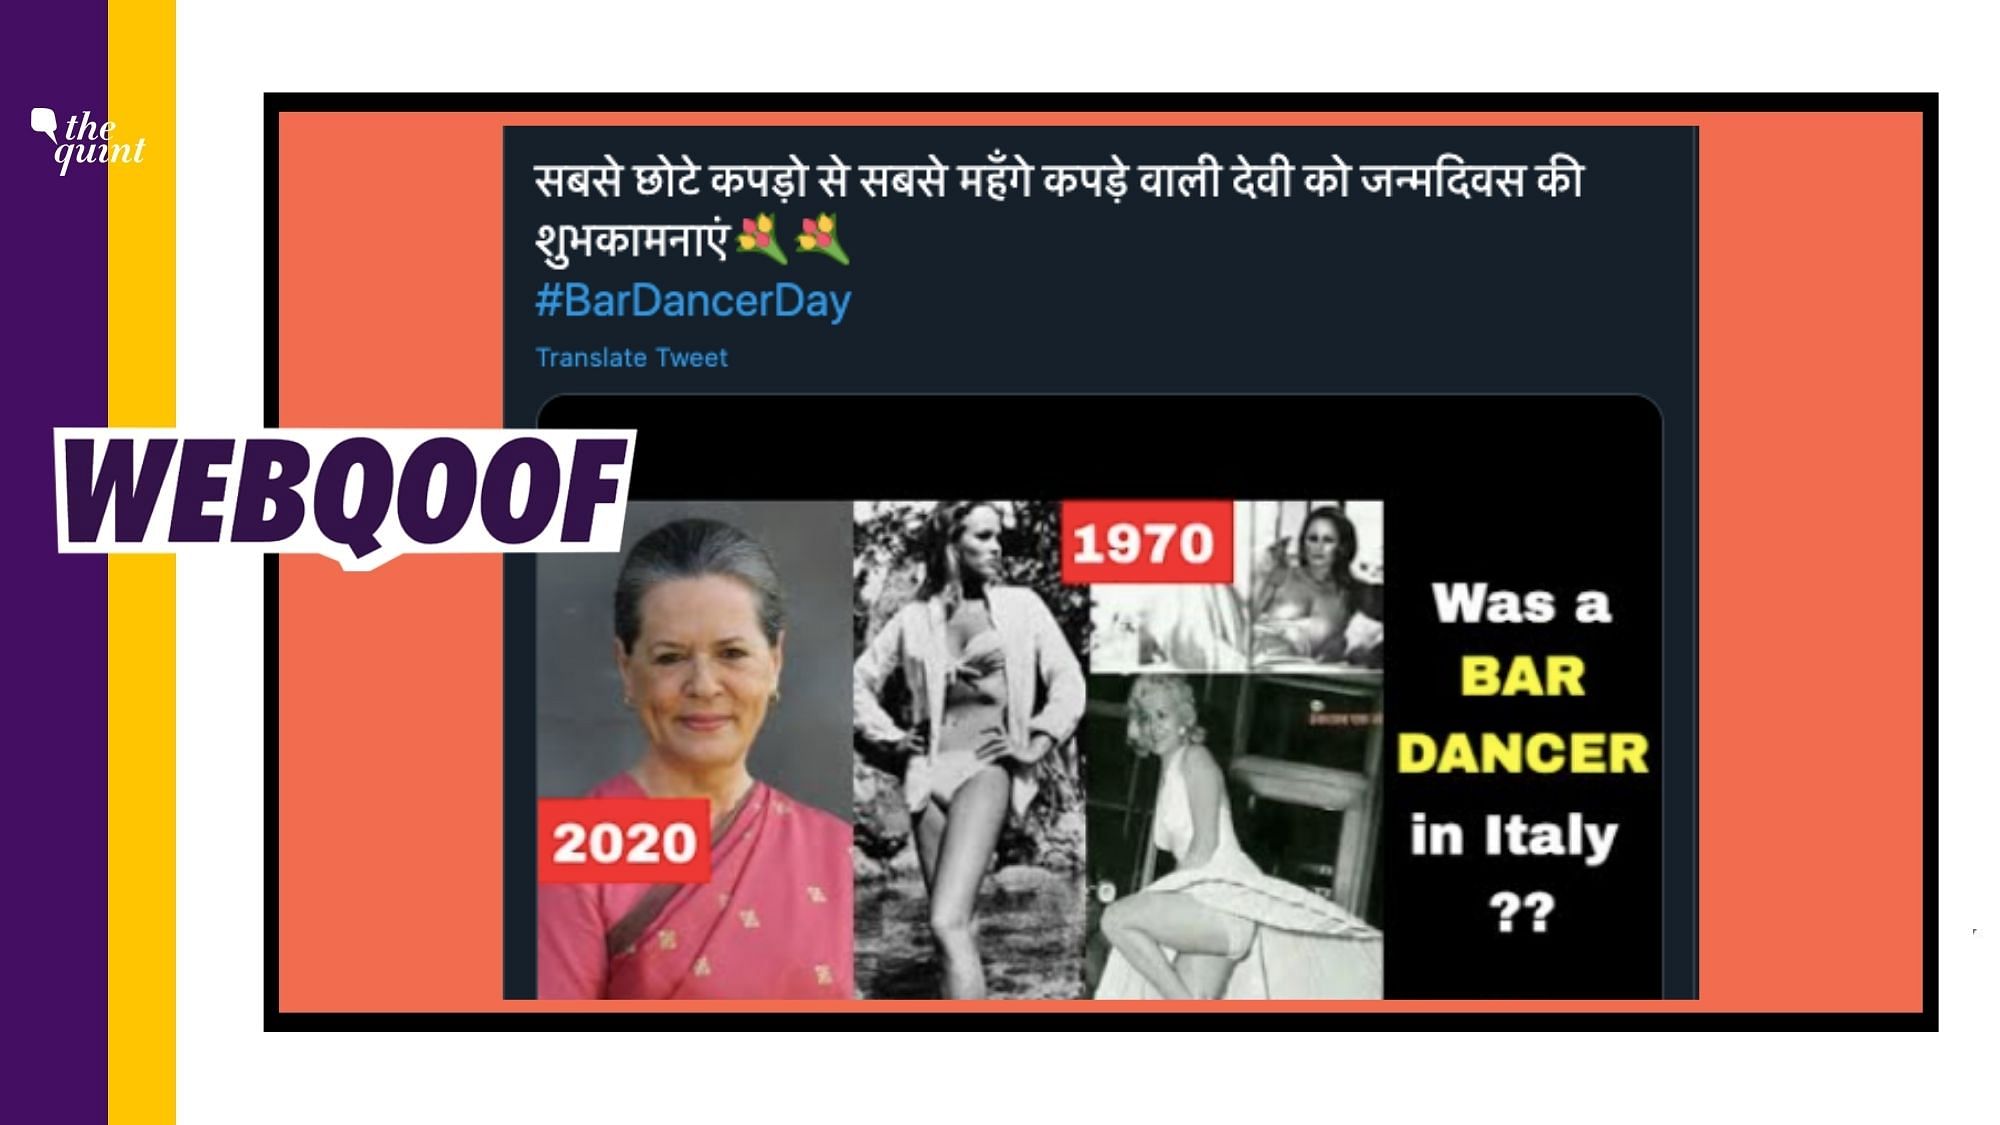 A set of images featuring Hollywood actors Marilyn Monroe and Ursula Andress are doing the rounds on social media as those of Congress president Sonia Gandhi.